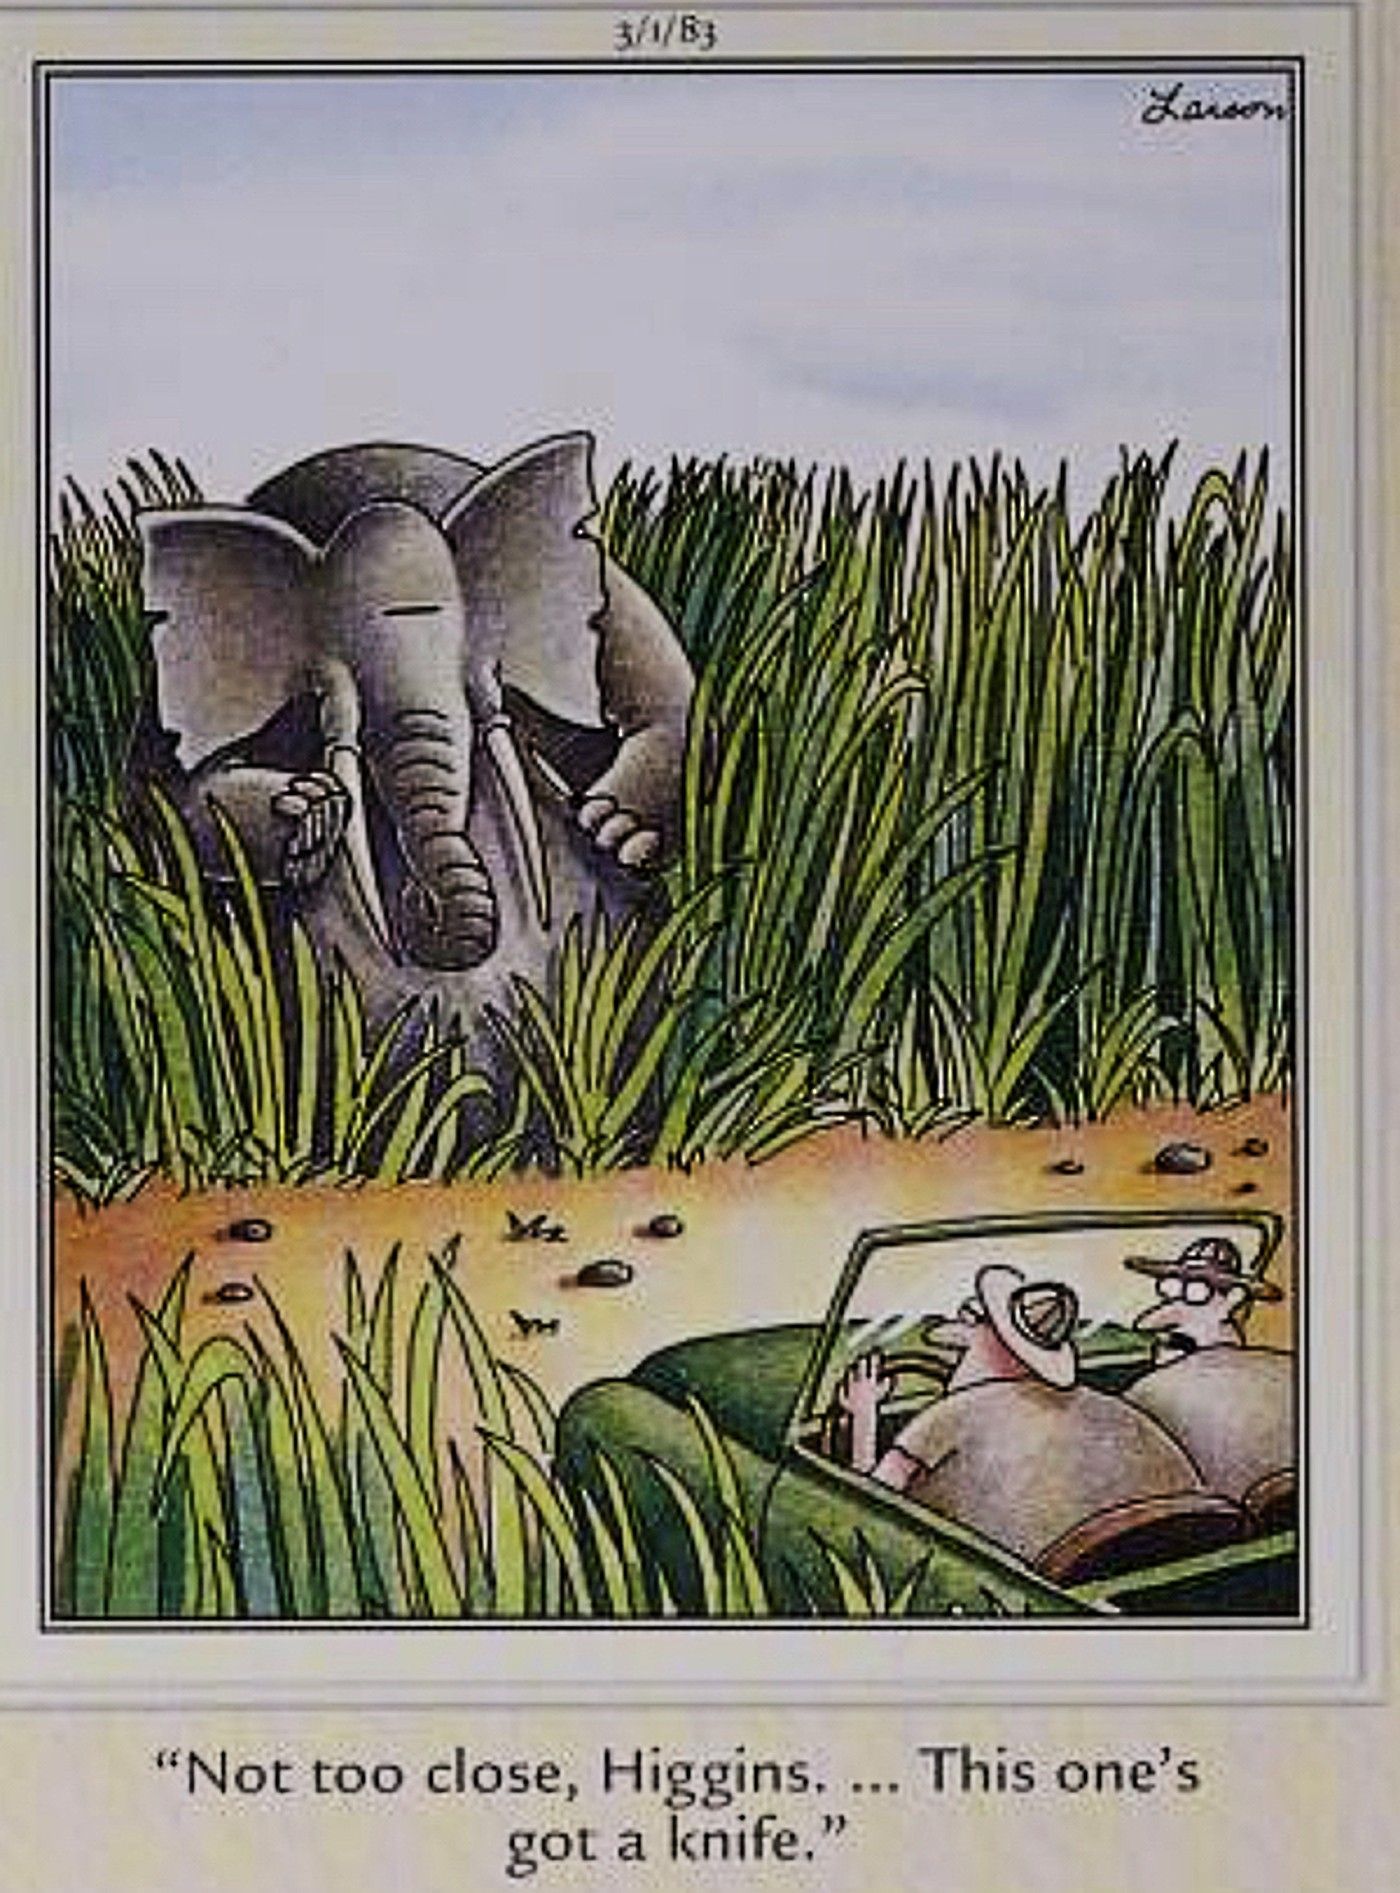 Far Side, elephant emerges from the brush wielding a knife